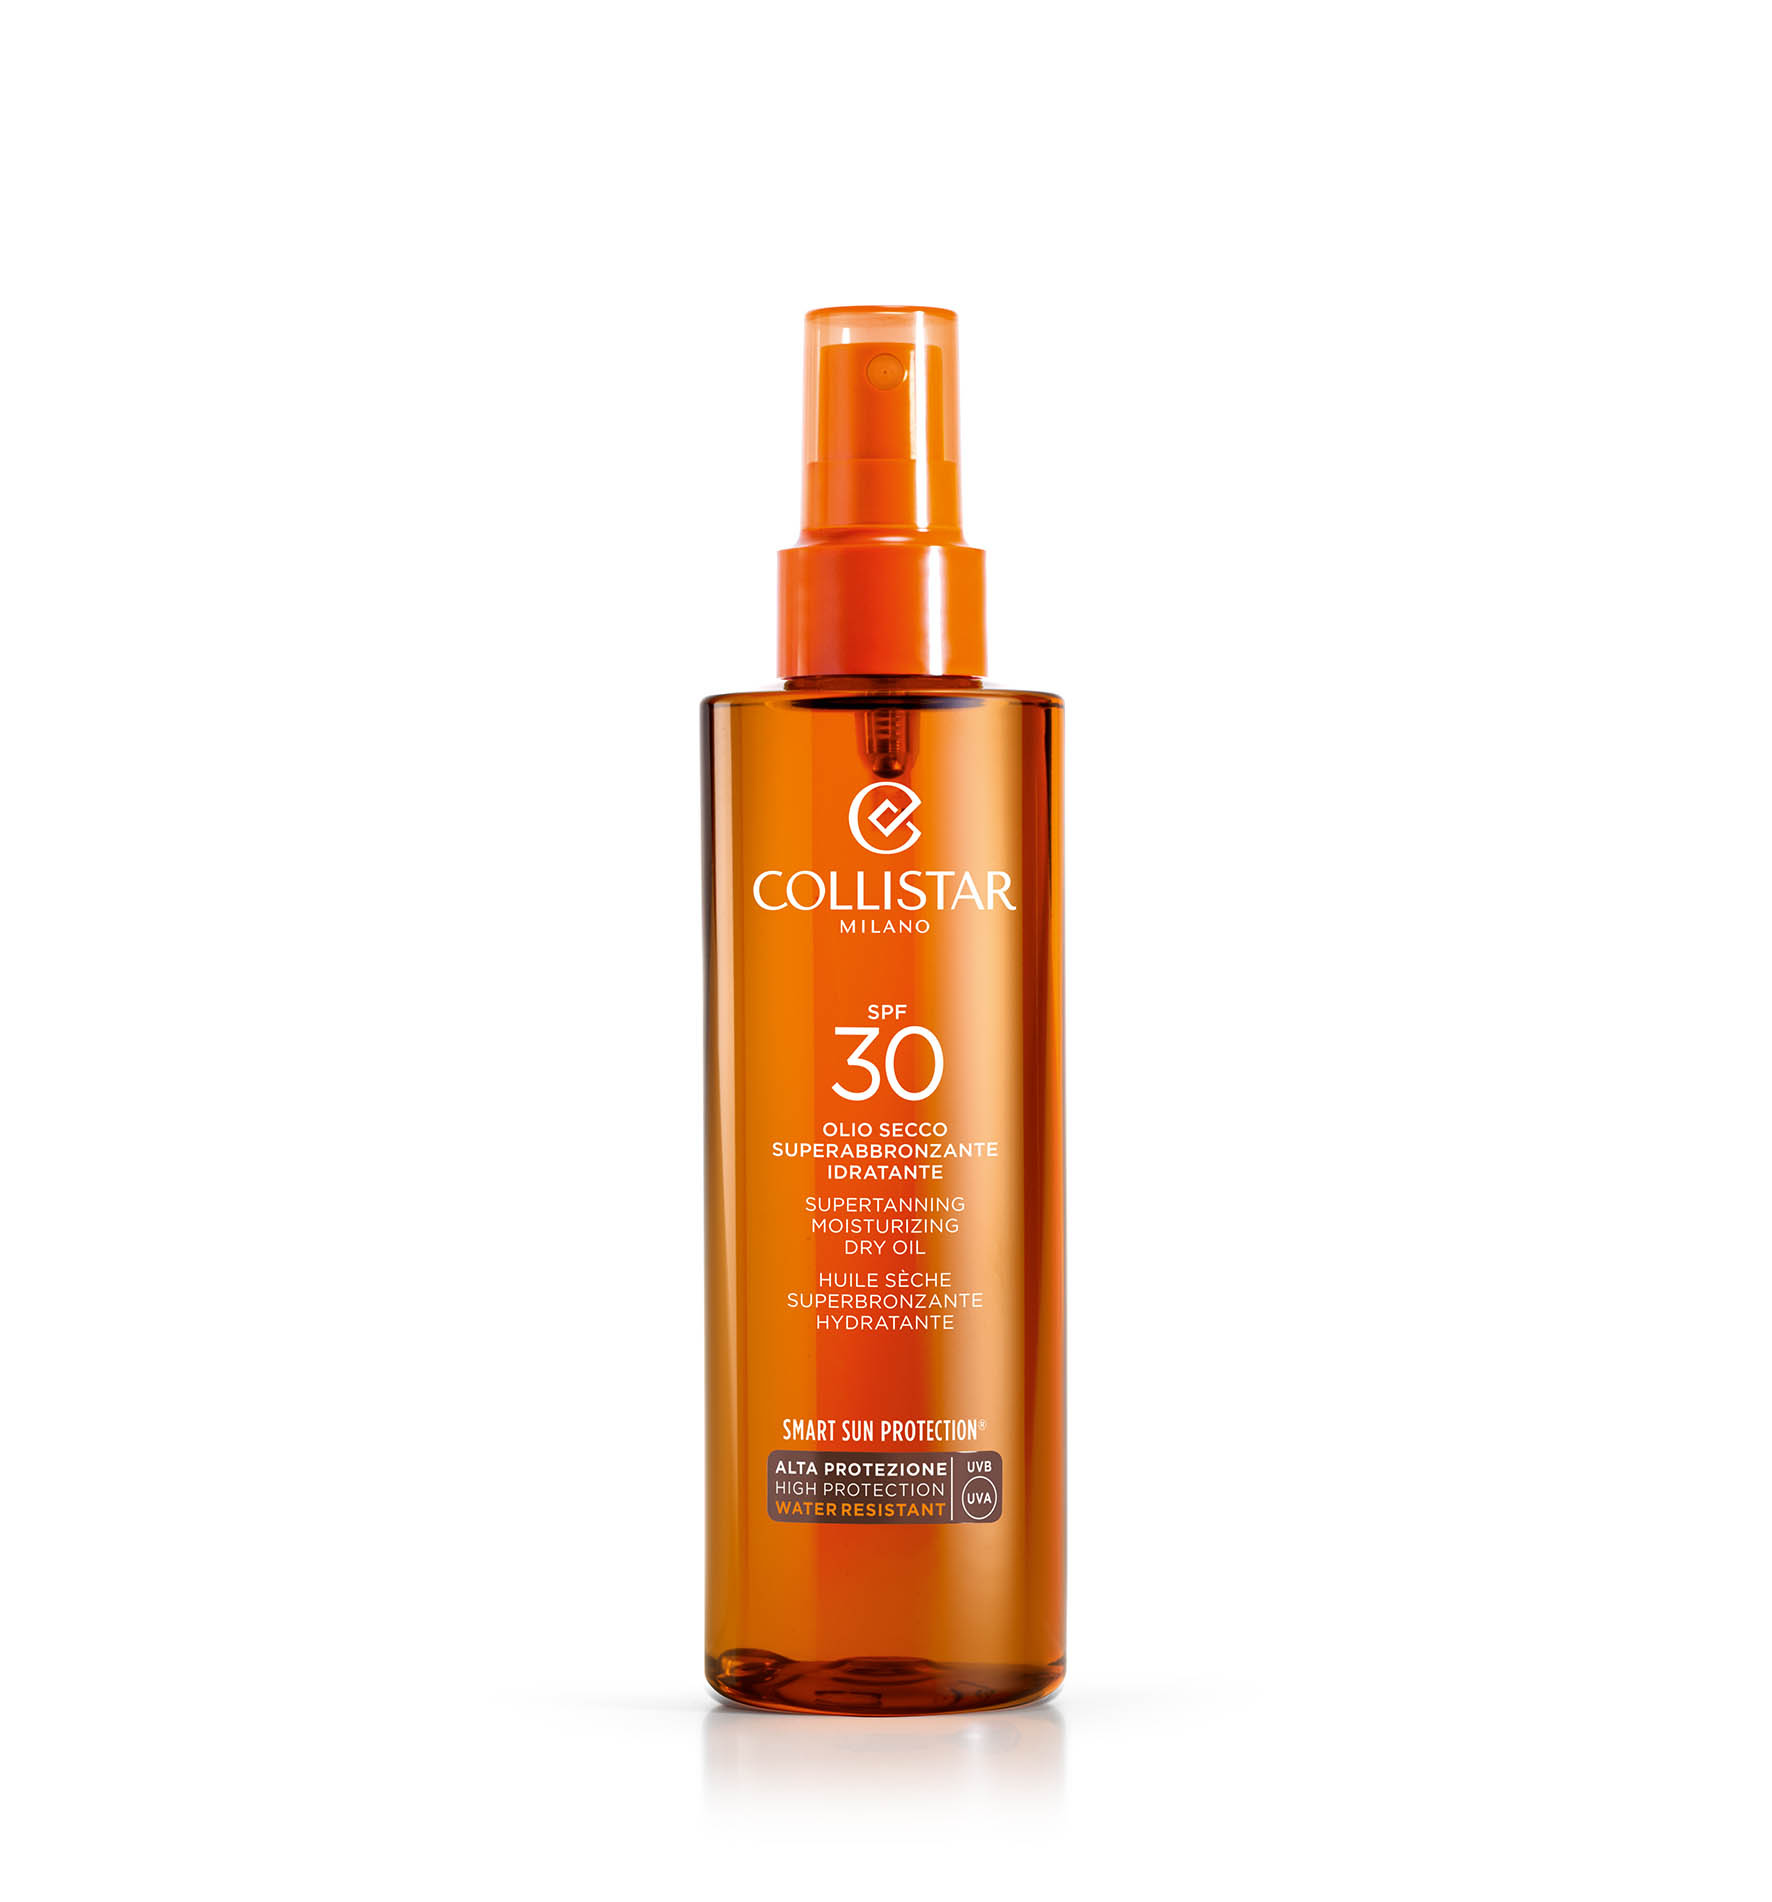 SUPERTANNING MOISTURIZING DRY OIL SPF 30 - High Protection SPF 30-50+ | Collistar - Shop Online Ufficiale